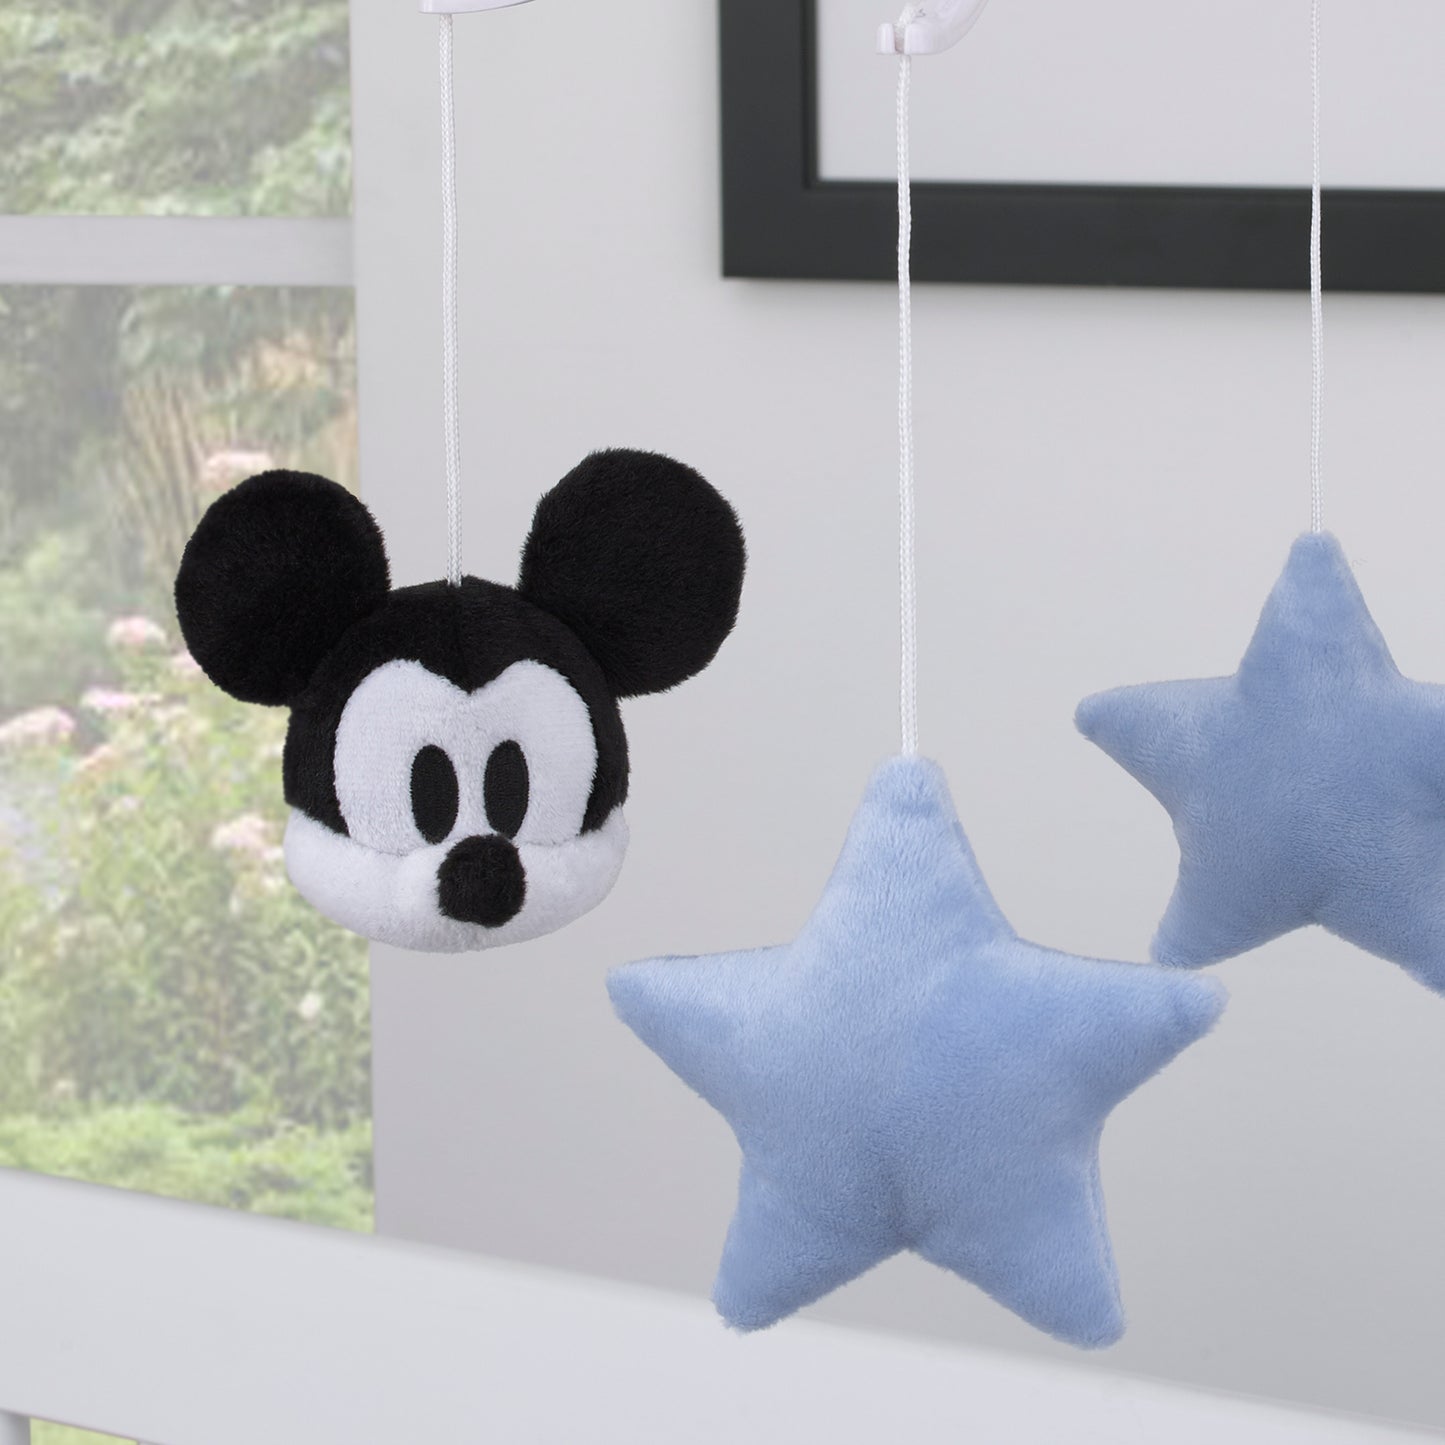 Disney Mickey Mouse - Timeless Mickey Mouse and Stars Musical Mobile